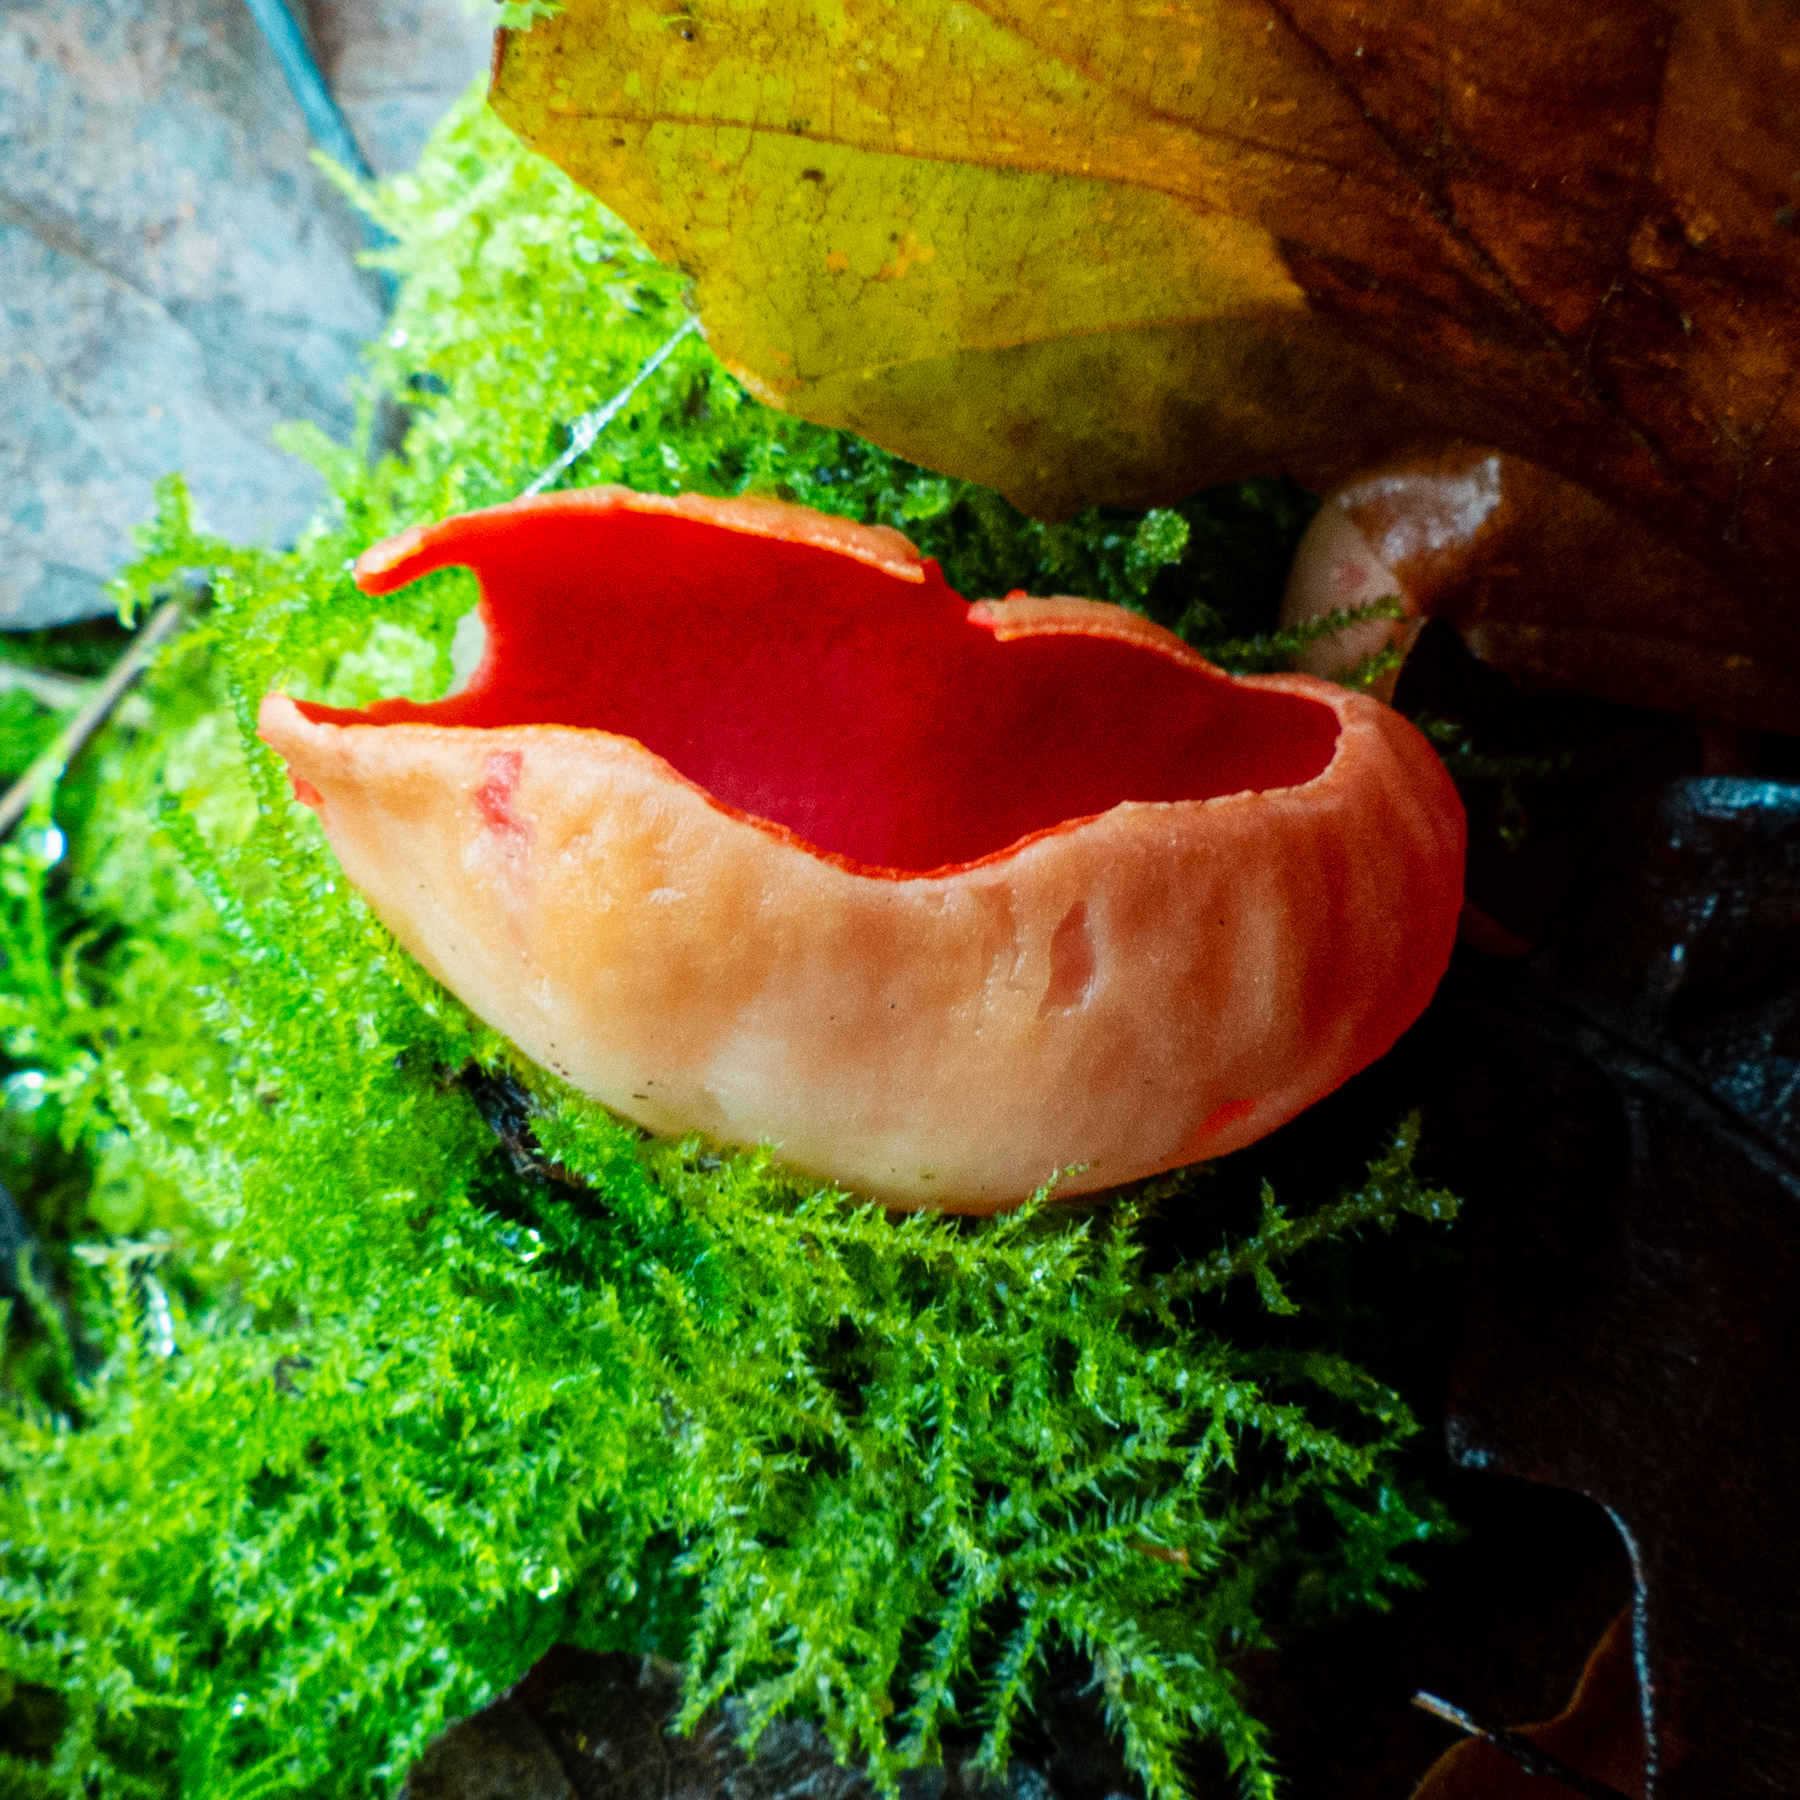 Scarlet Elf Cup a red winter fungus